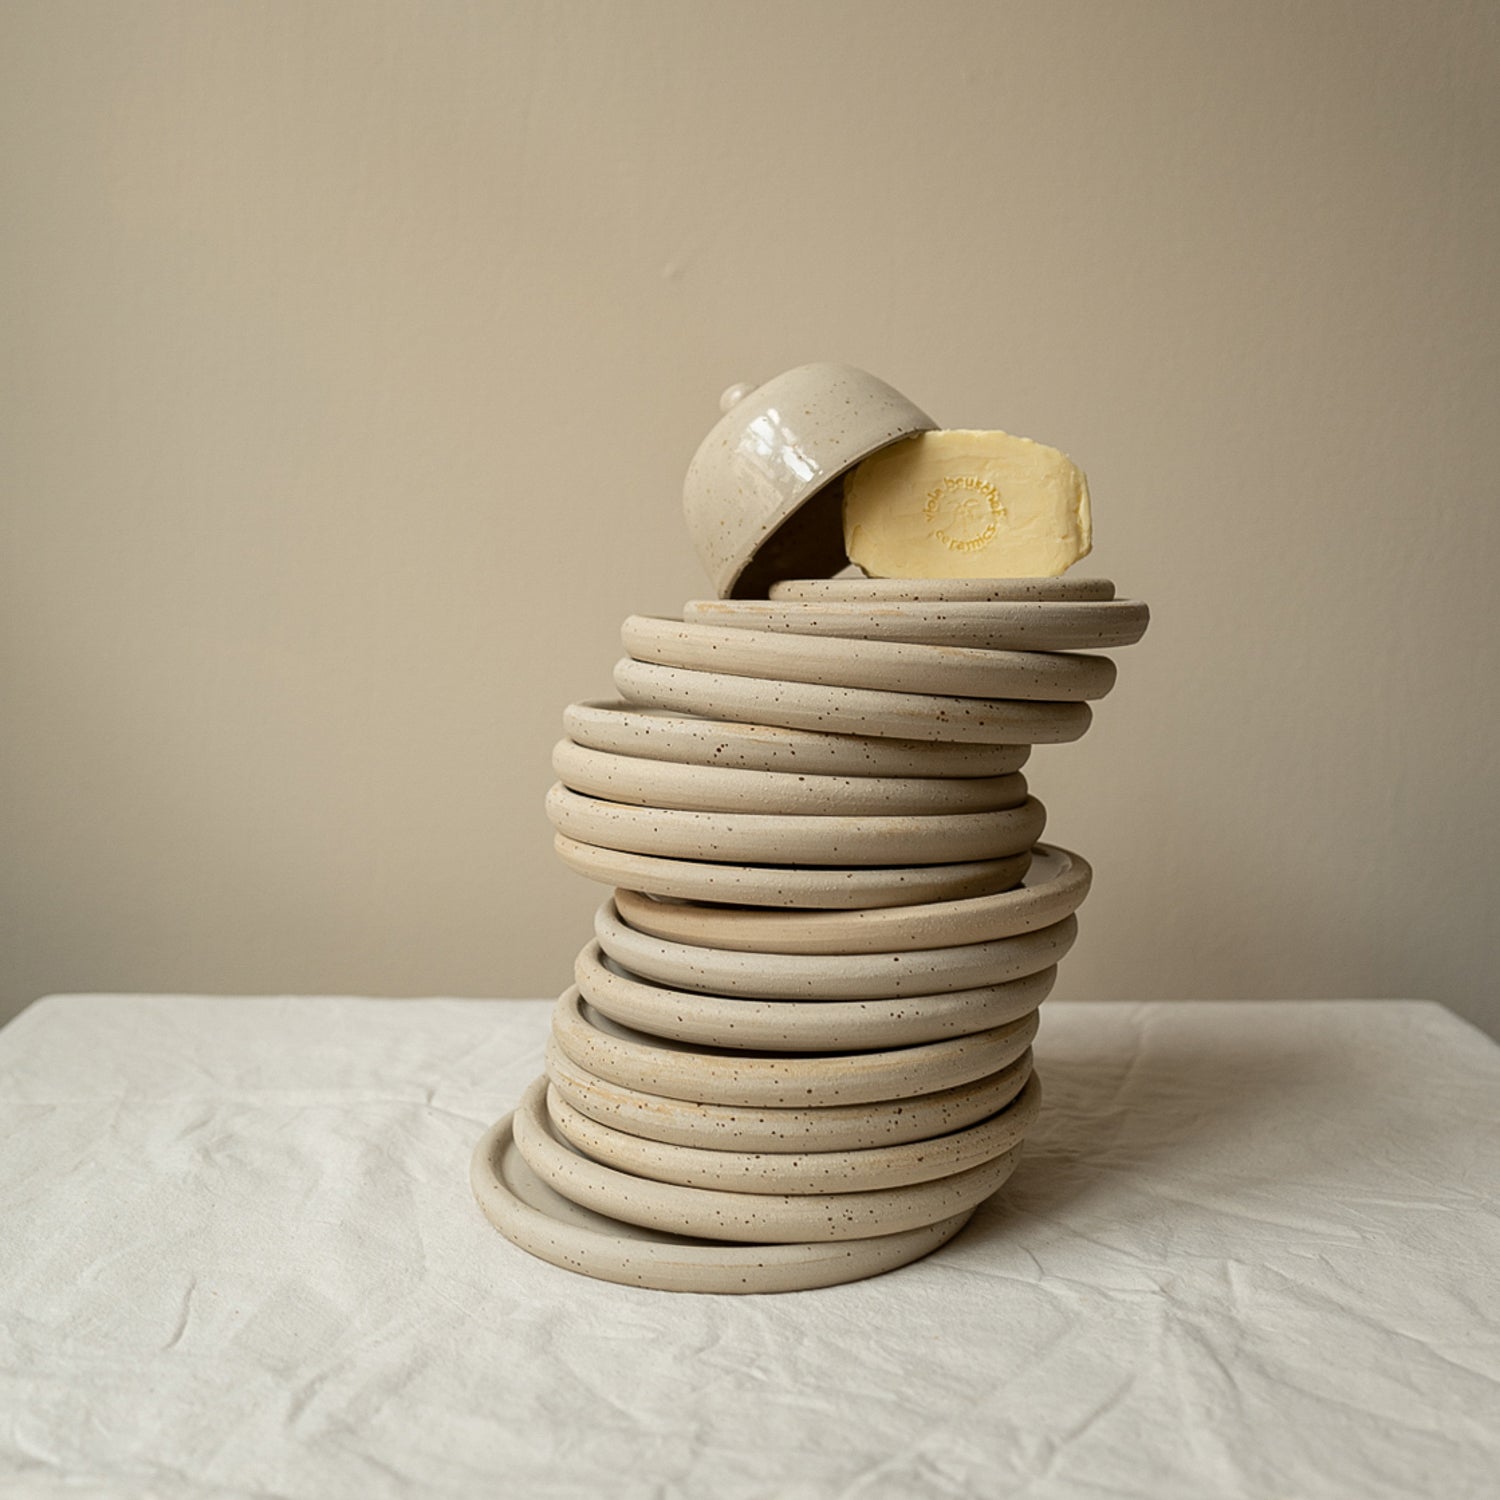 Shows the Butter Dishes from a cooperation between Viola Beuscher Ceramics and Maison Palme. In the picture you can see many coasters stacked with an attachment and a butter on top.